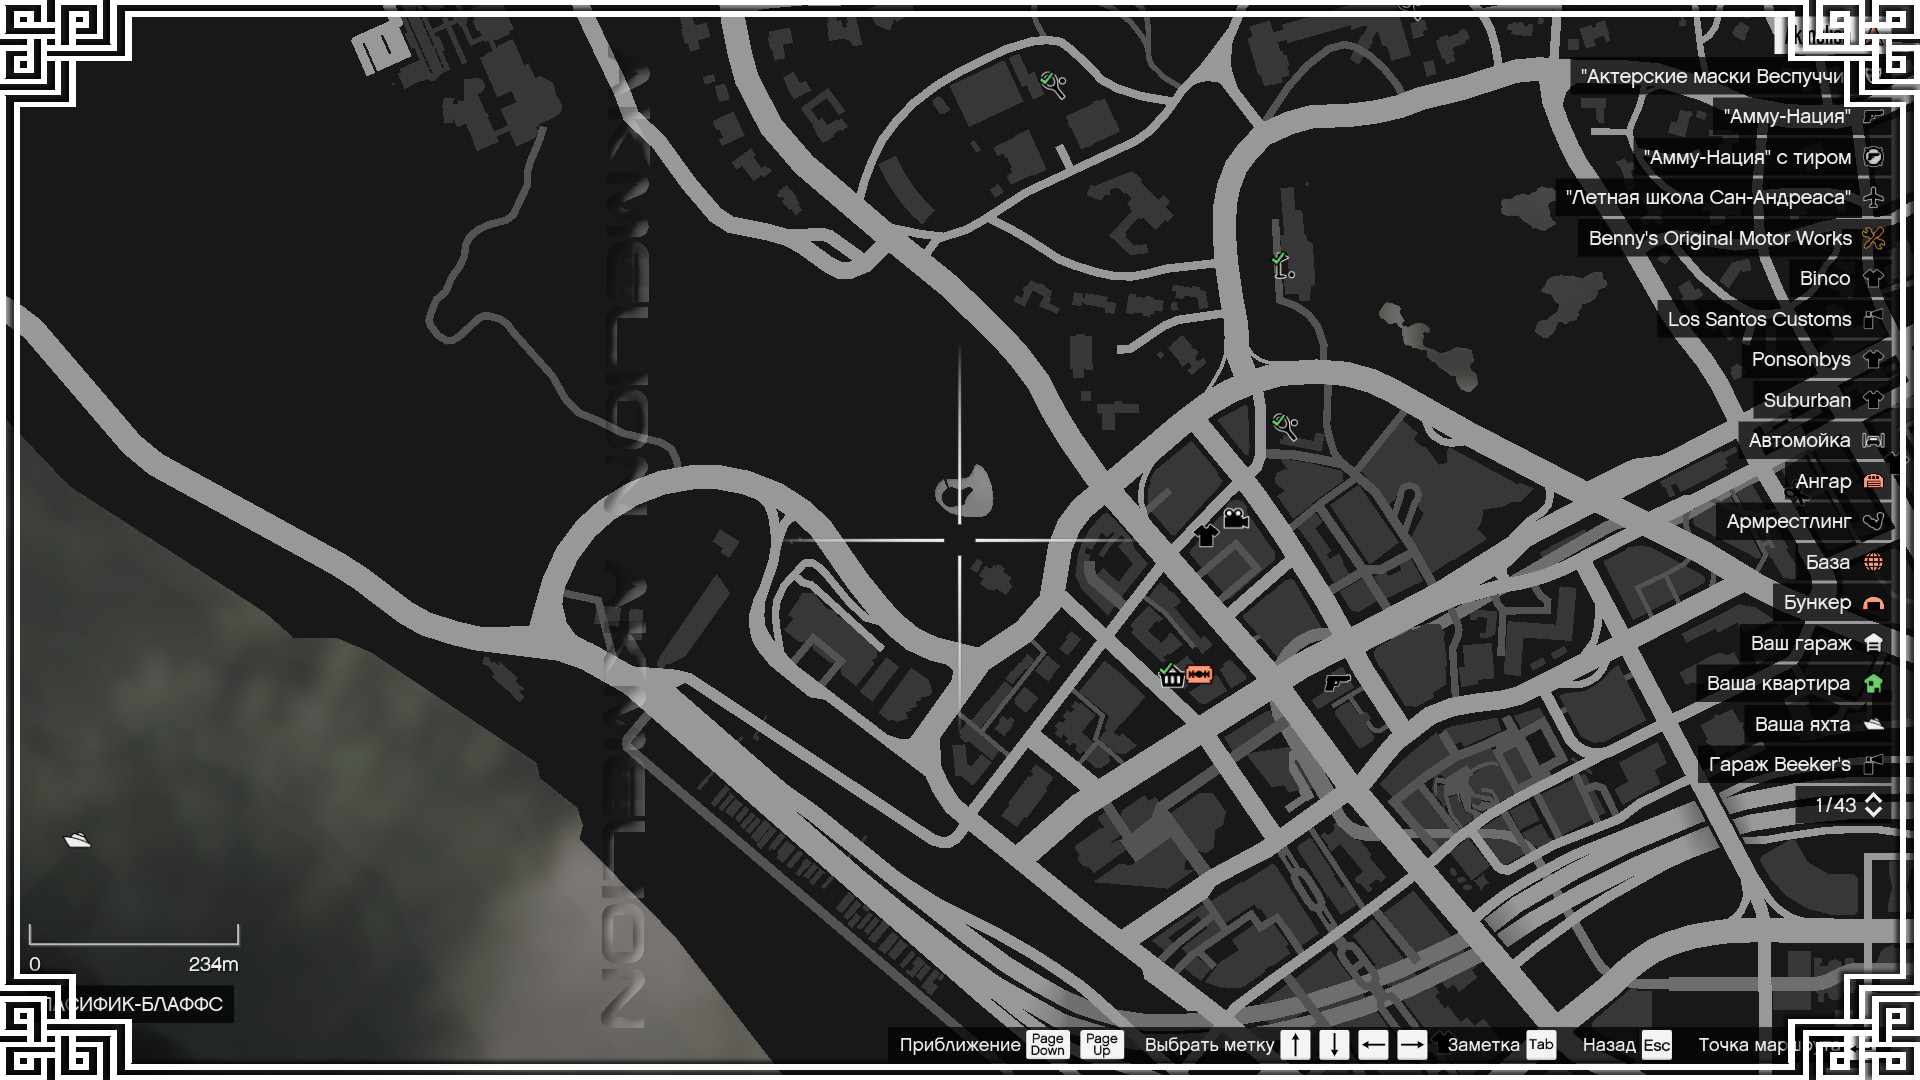 GTA 5 Action Figure Collectible Map